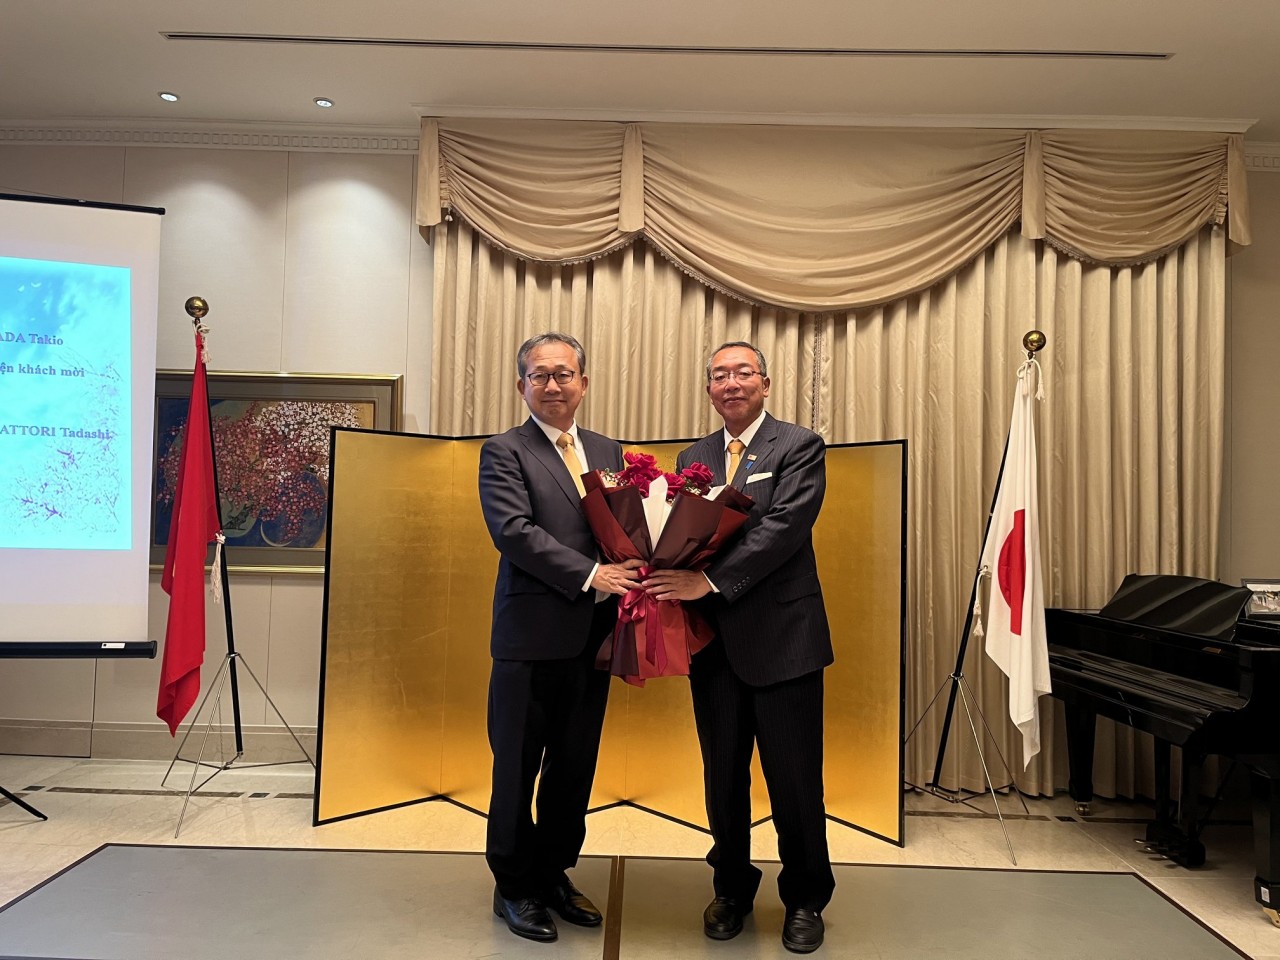 Ambassador Yamada Takio invited Dr. Hattori Tadashi to the Ambassador's Residence to hold a party to congratulate him on being awarded the Ramon Magsaysay Award and wish him continued success in the future.